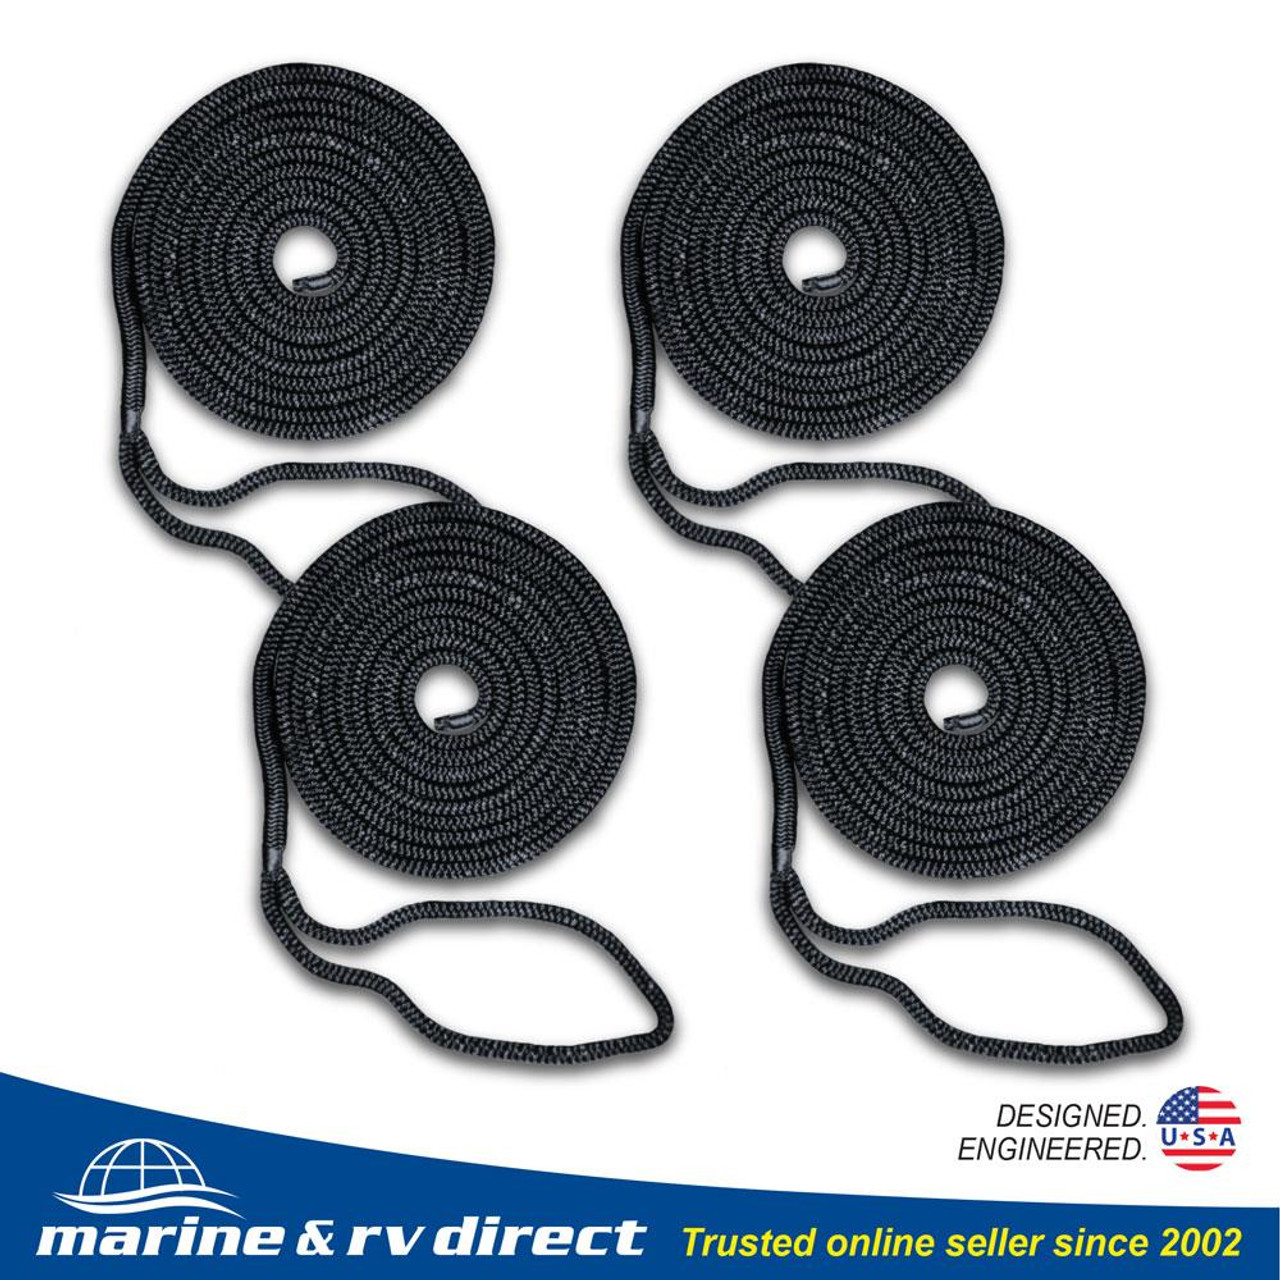  Kohree Boat Dock Lines, 3/8 x 15 ft Boat Tow Rope, Double  Braided Nylon Boat Dock Rope, Mooring Lines, Dock Lines for Boats 3/8 with  12 Eyelet, 4 Pack, Black, Boat